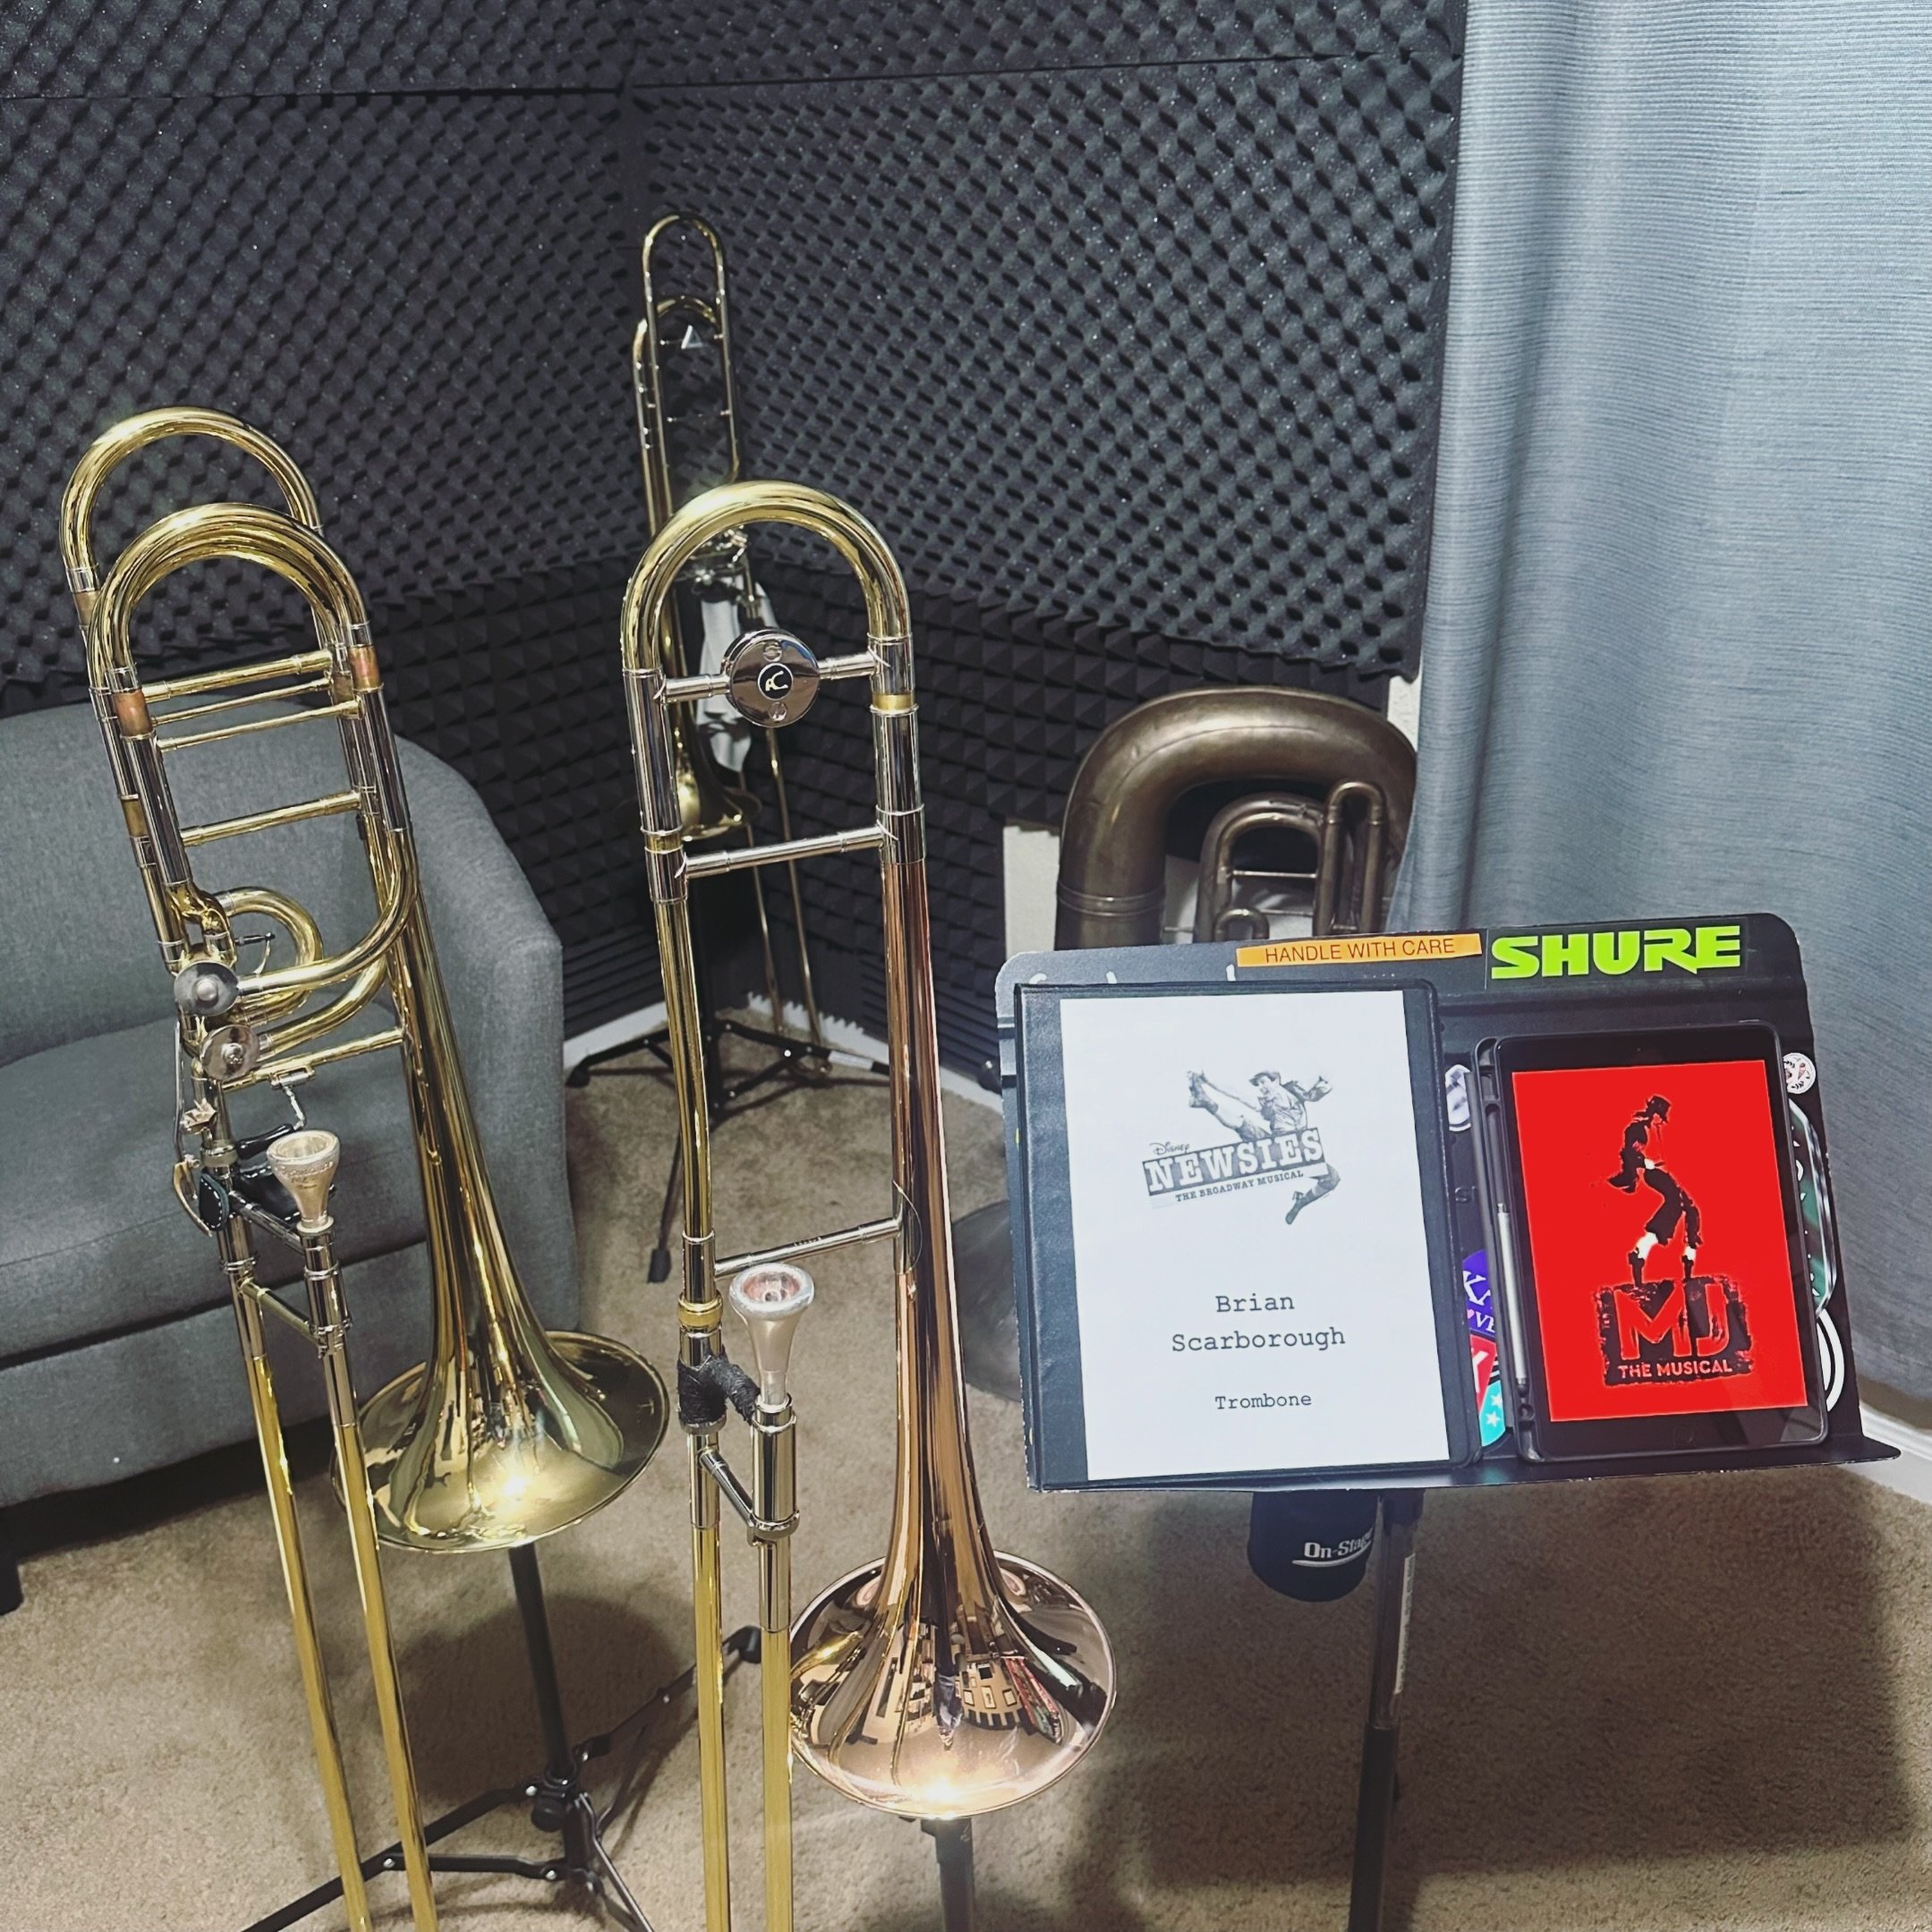 Some fun music on the stand right now; really looking forward to the next few weeks!
.
.
.
.
.
.
.
.
.
.
.
.
.
#bonetruthmusic #trombone #basstrombone #trombonelife #trombonist #wearecourtois #newsiesmusical #newsiesbroadway #musicaltheater #musicalt